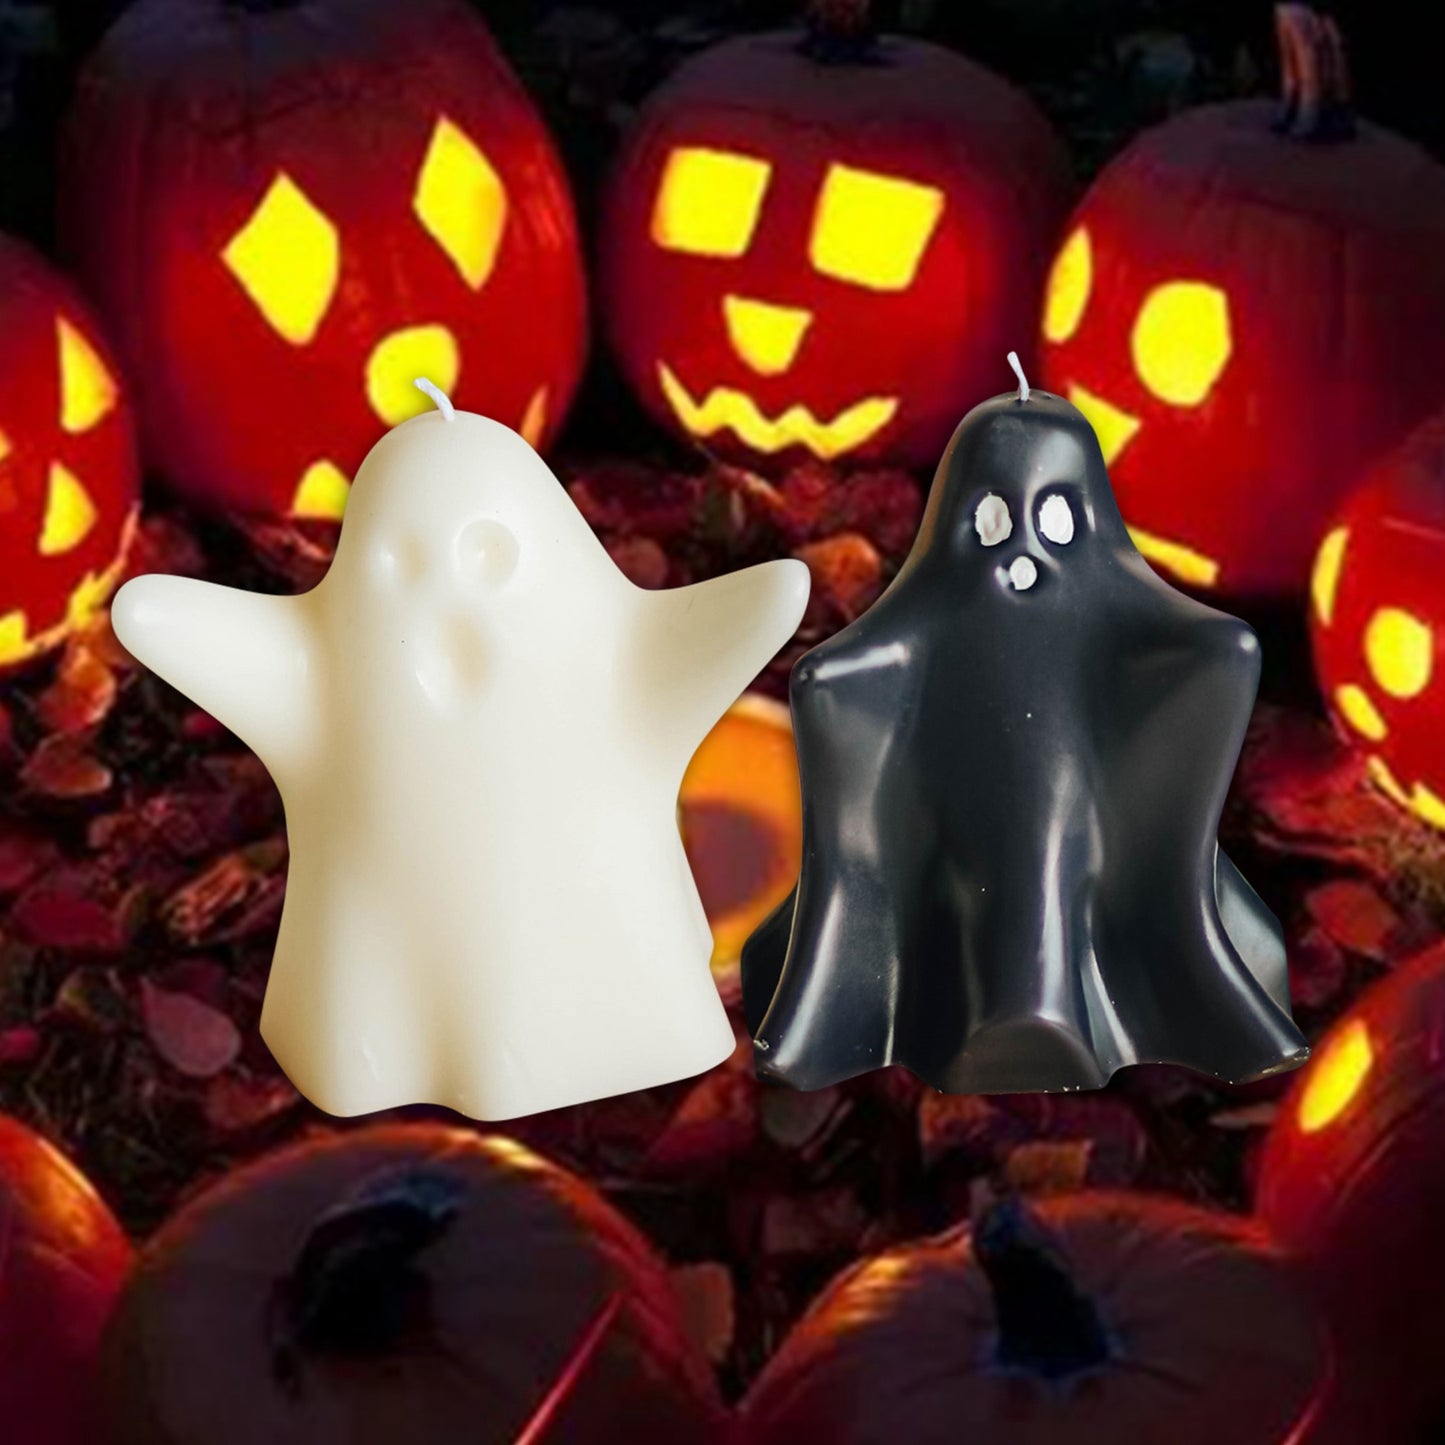 Halloween Spooky Candles Halloween Party 3-pack